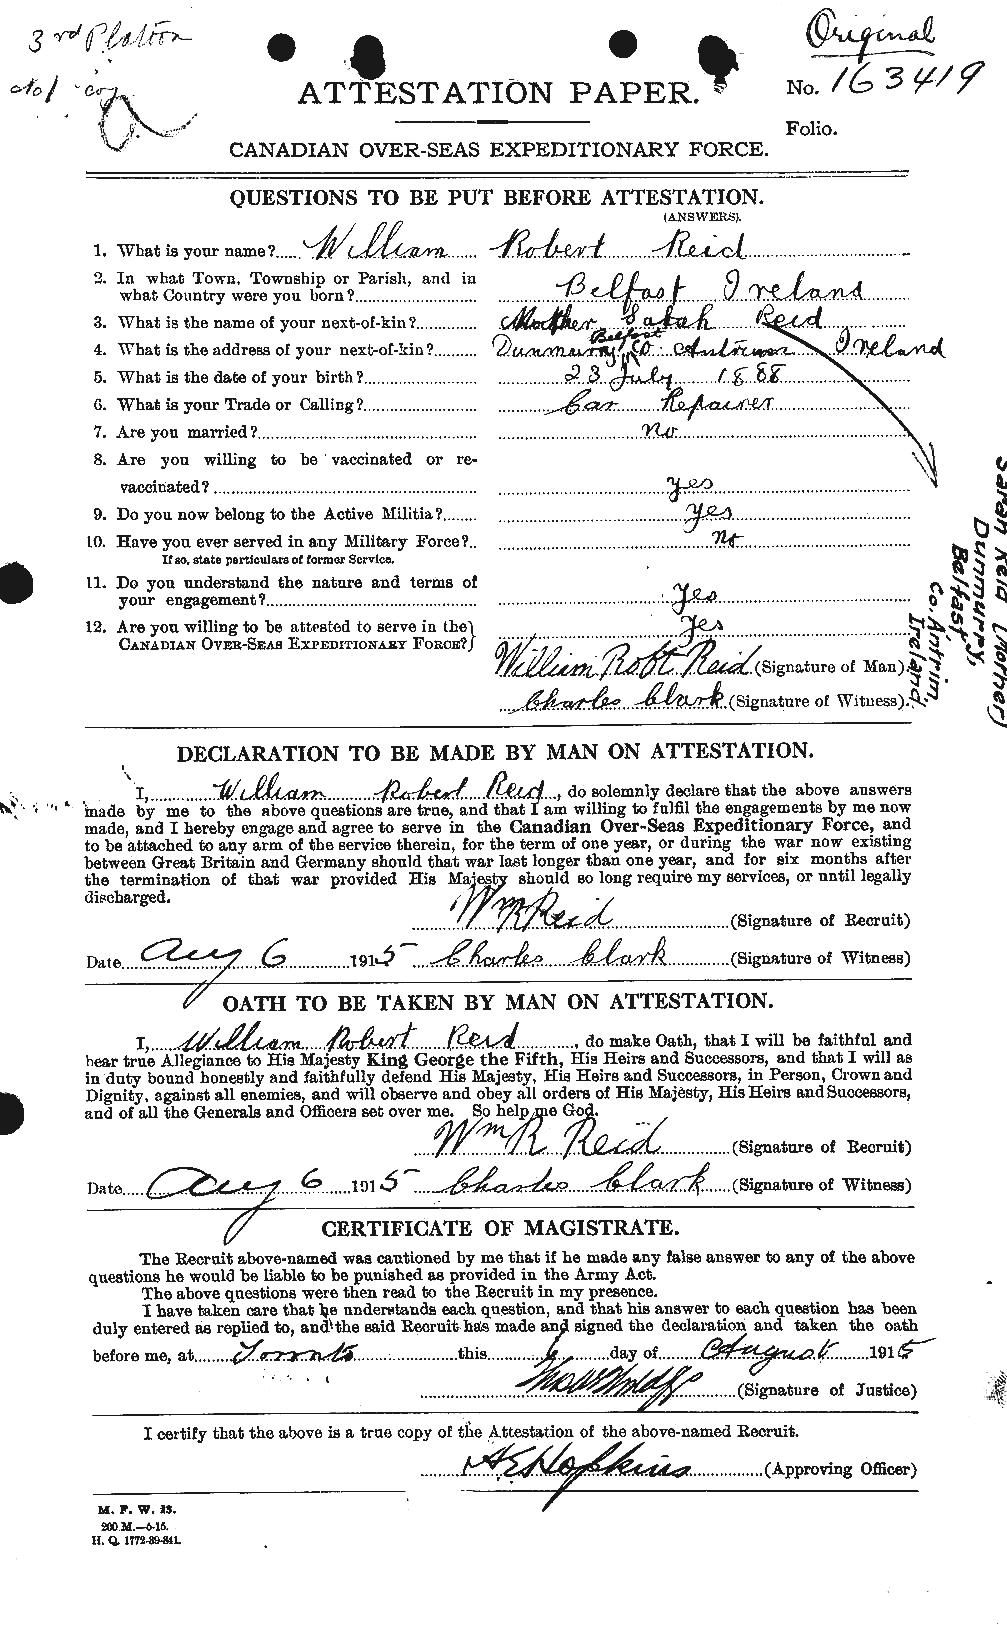 Personnel Records of the First World War - CEF 597030a